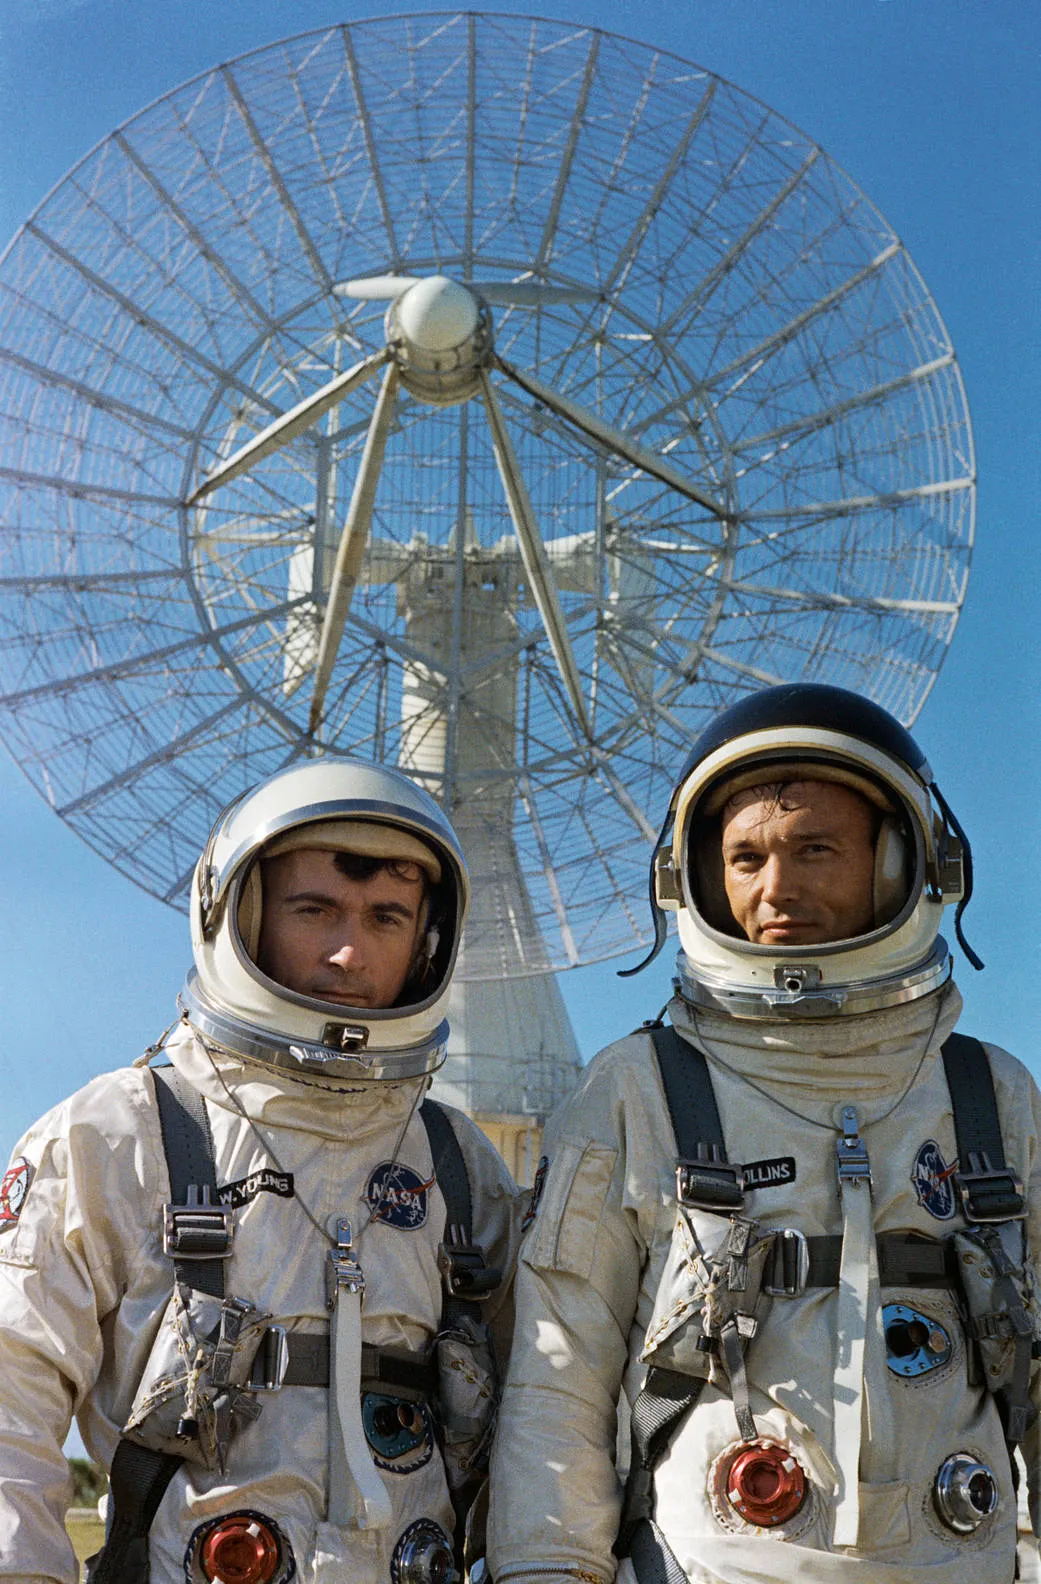 John W. Young (left) and Michael Collins during a press photo session for the Gemini 10 mission, 16 July 1966. Credit: NASA